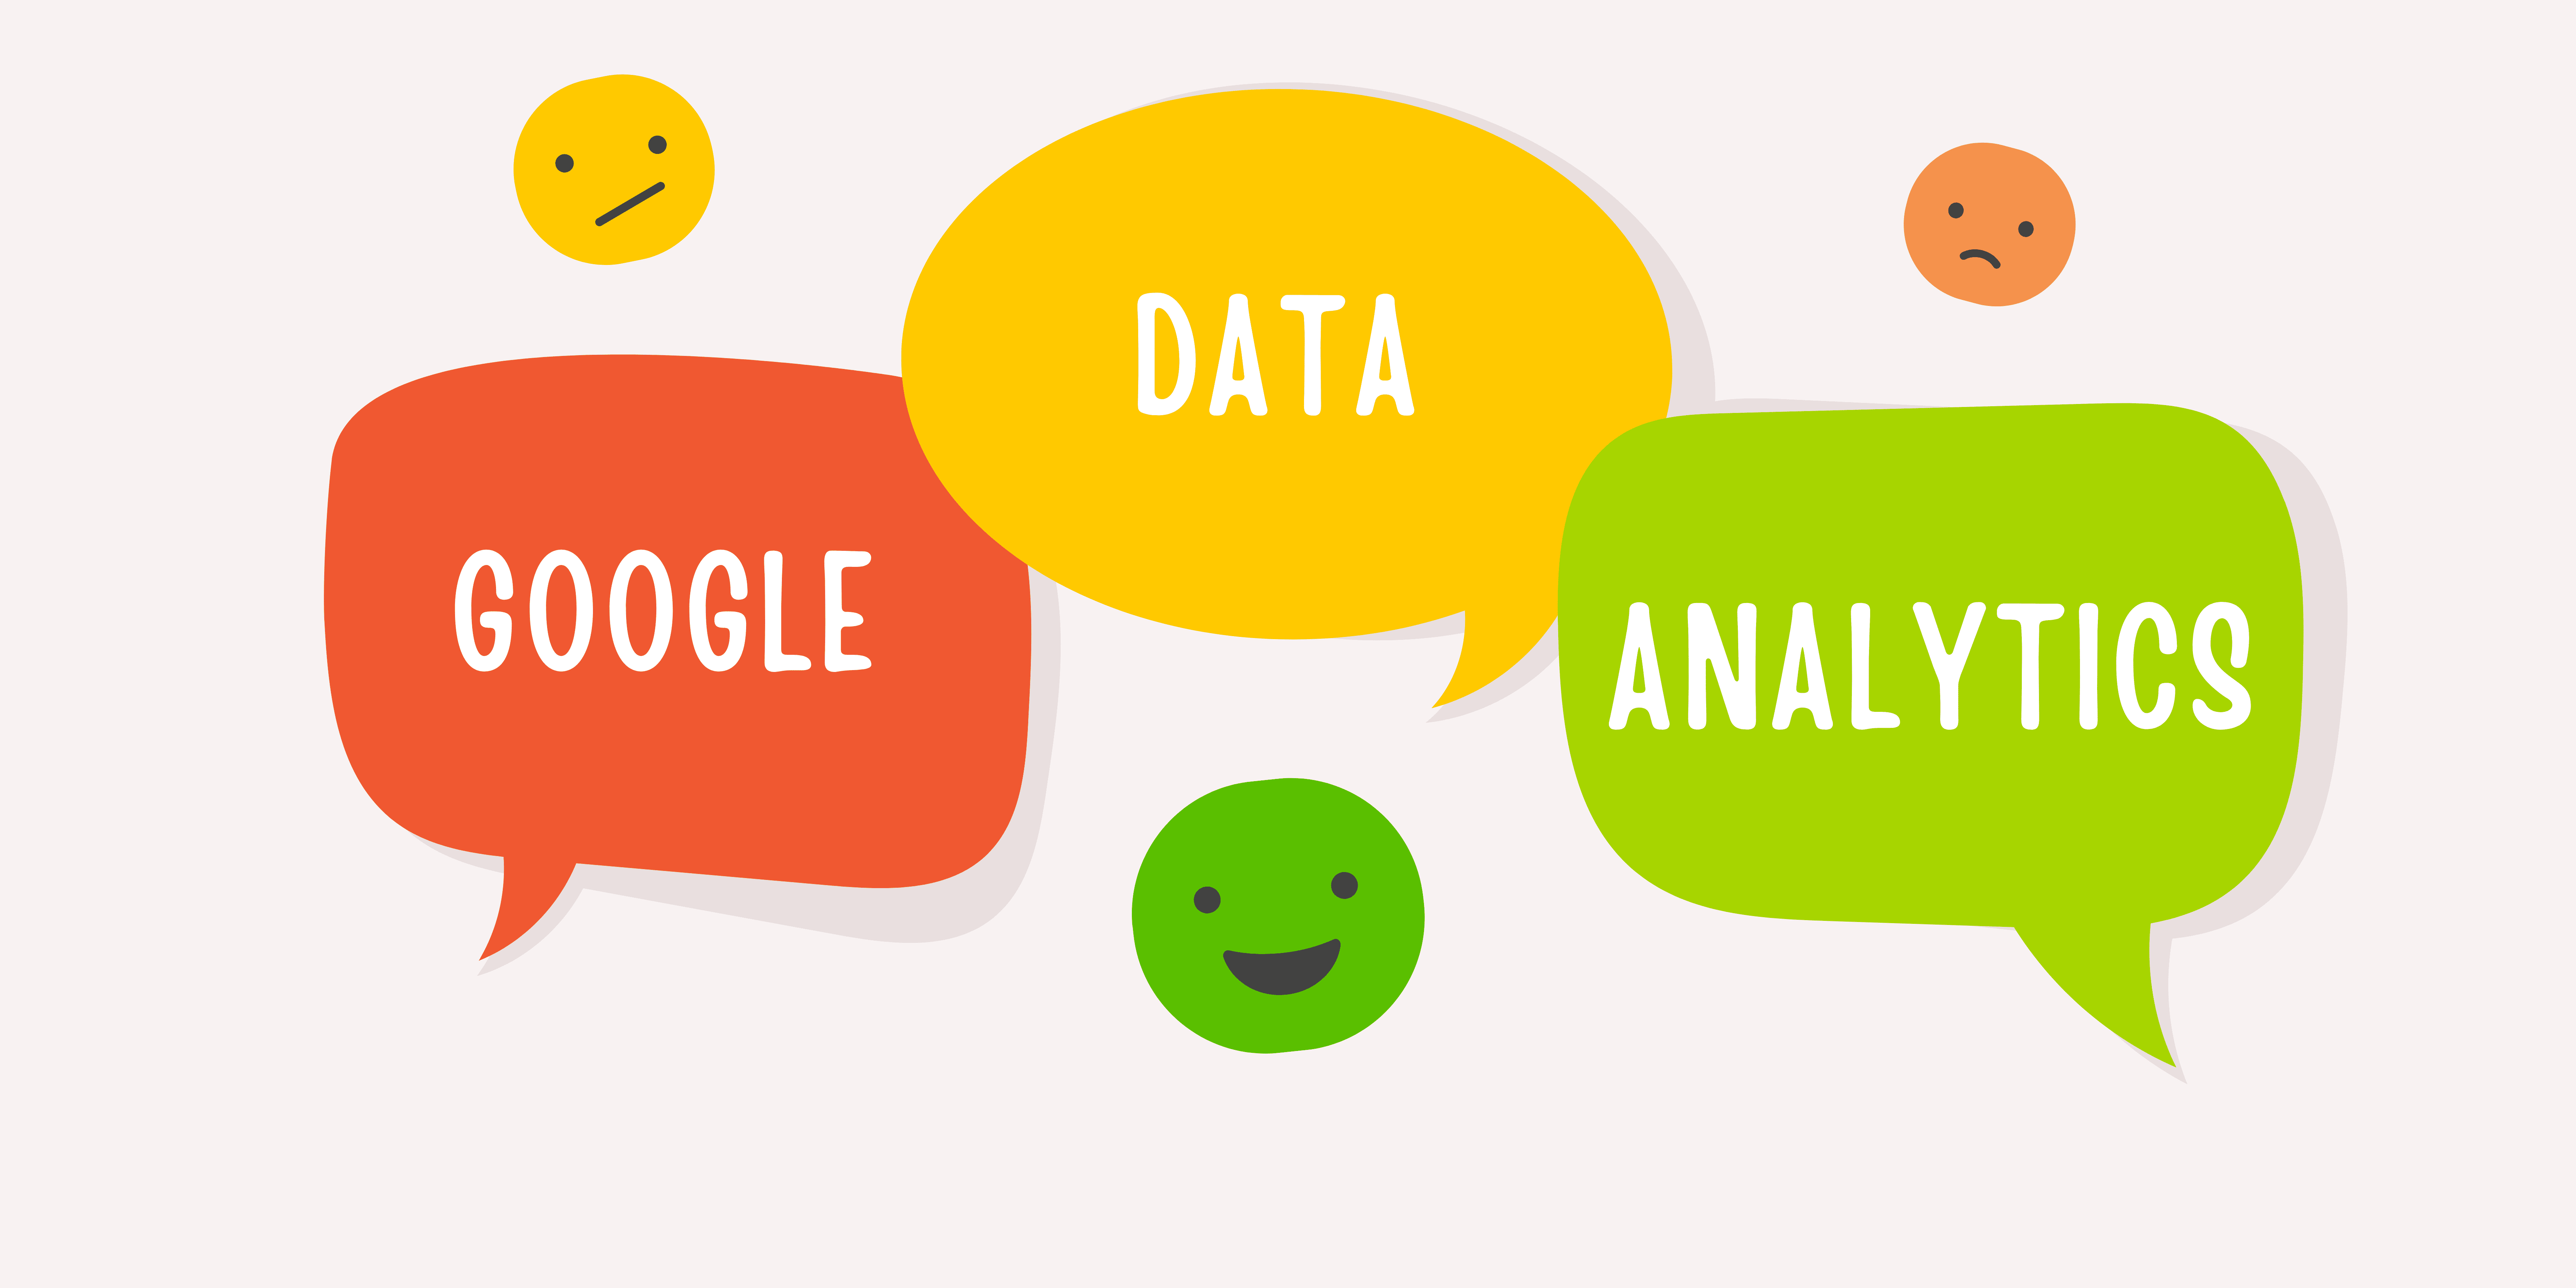 Join 2,148,697 registered users and get your Google Data Analytics Certification